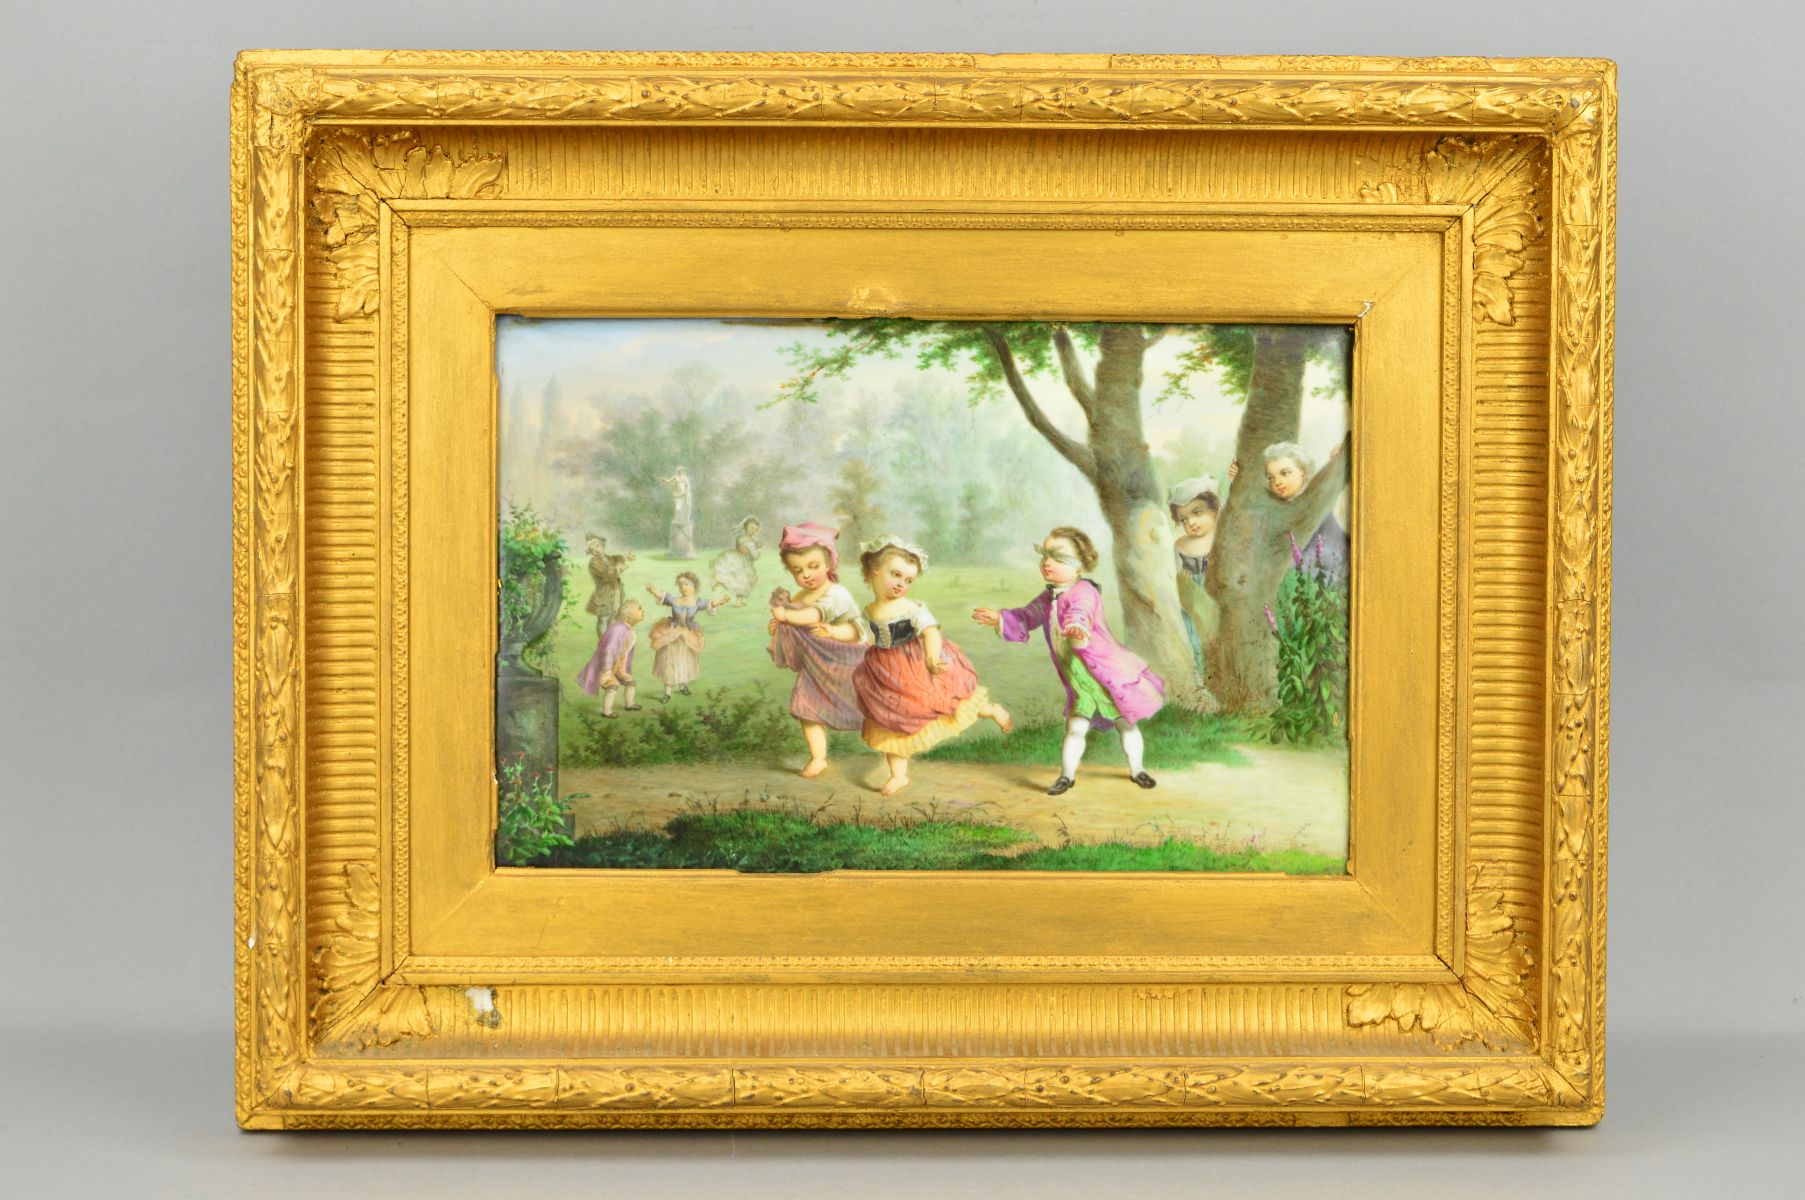 A 19TH CENTURY RECTANGULAR PORCELAIN PLAQUE, painted with children in mid/late 18th Century